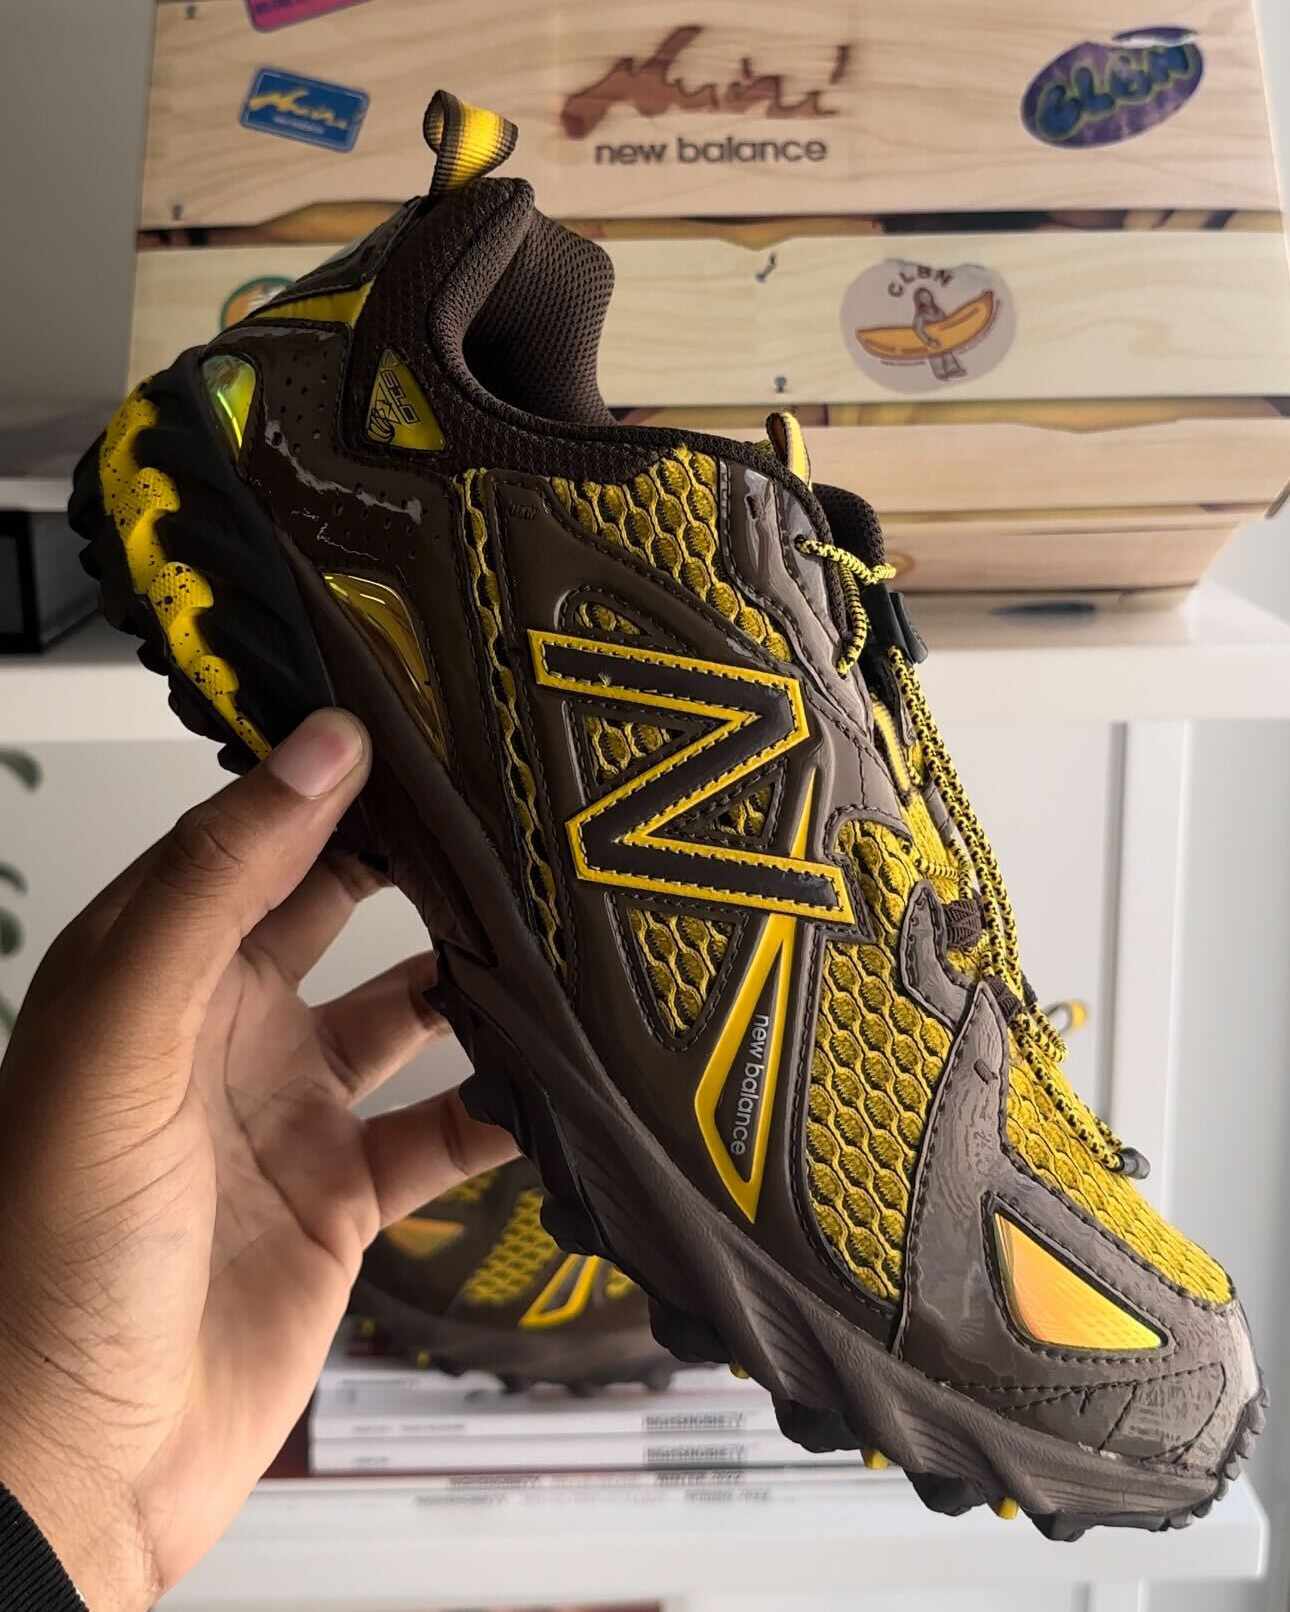 Amine's New Balance shoe collab, "The Mooz," seen in-hand